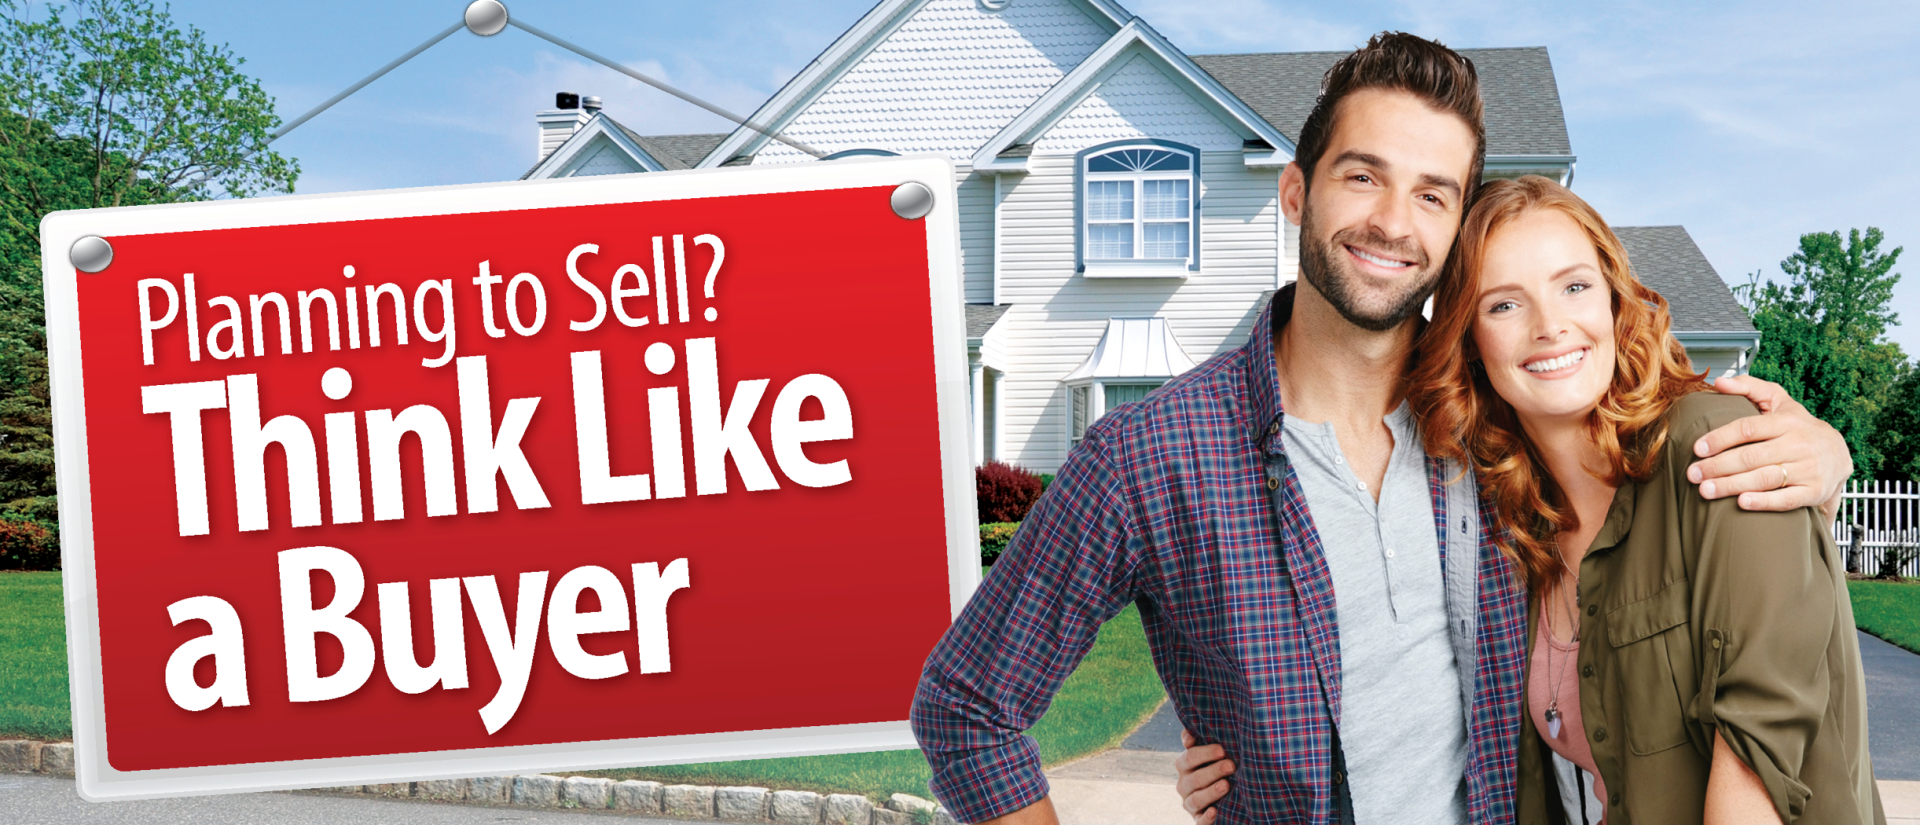 Planning to Sell? Think like a Buyer